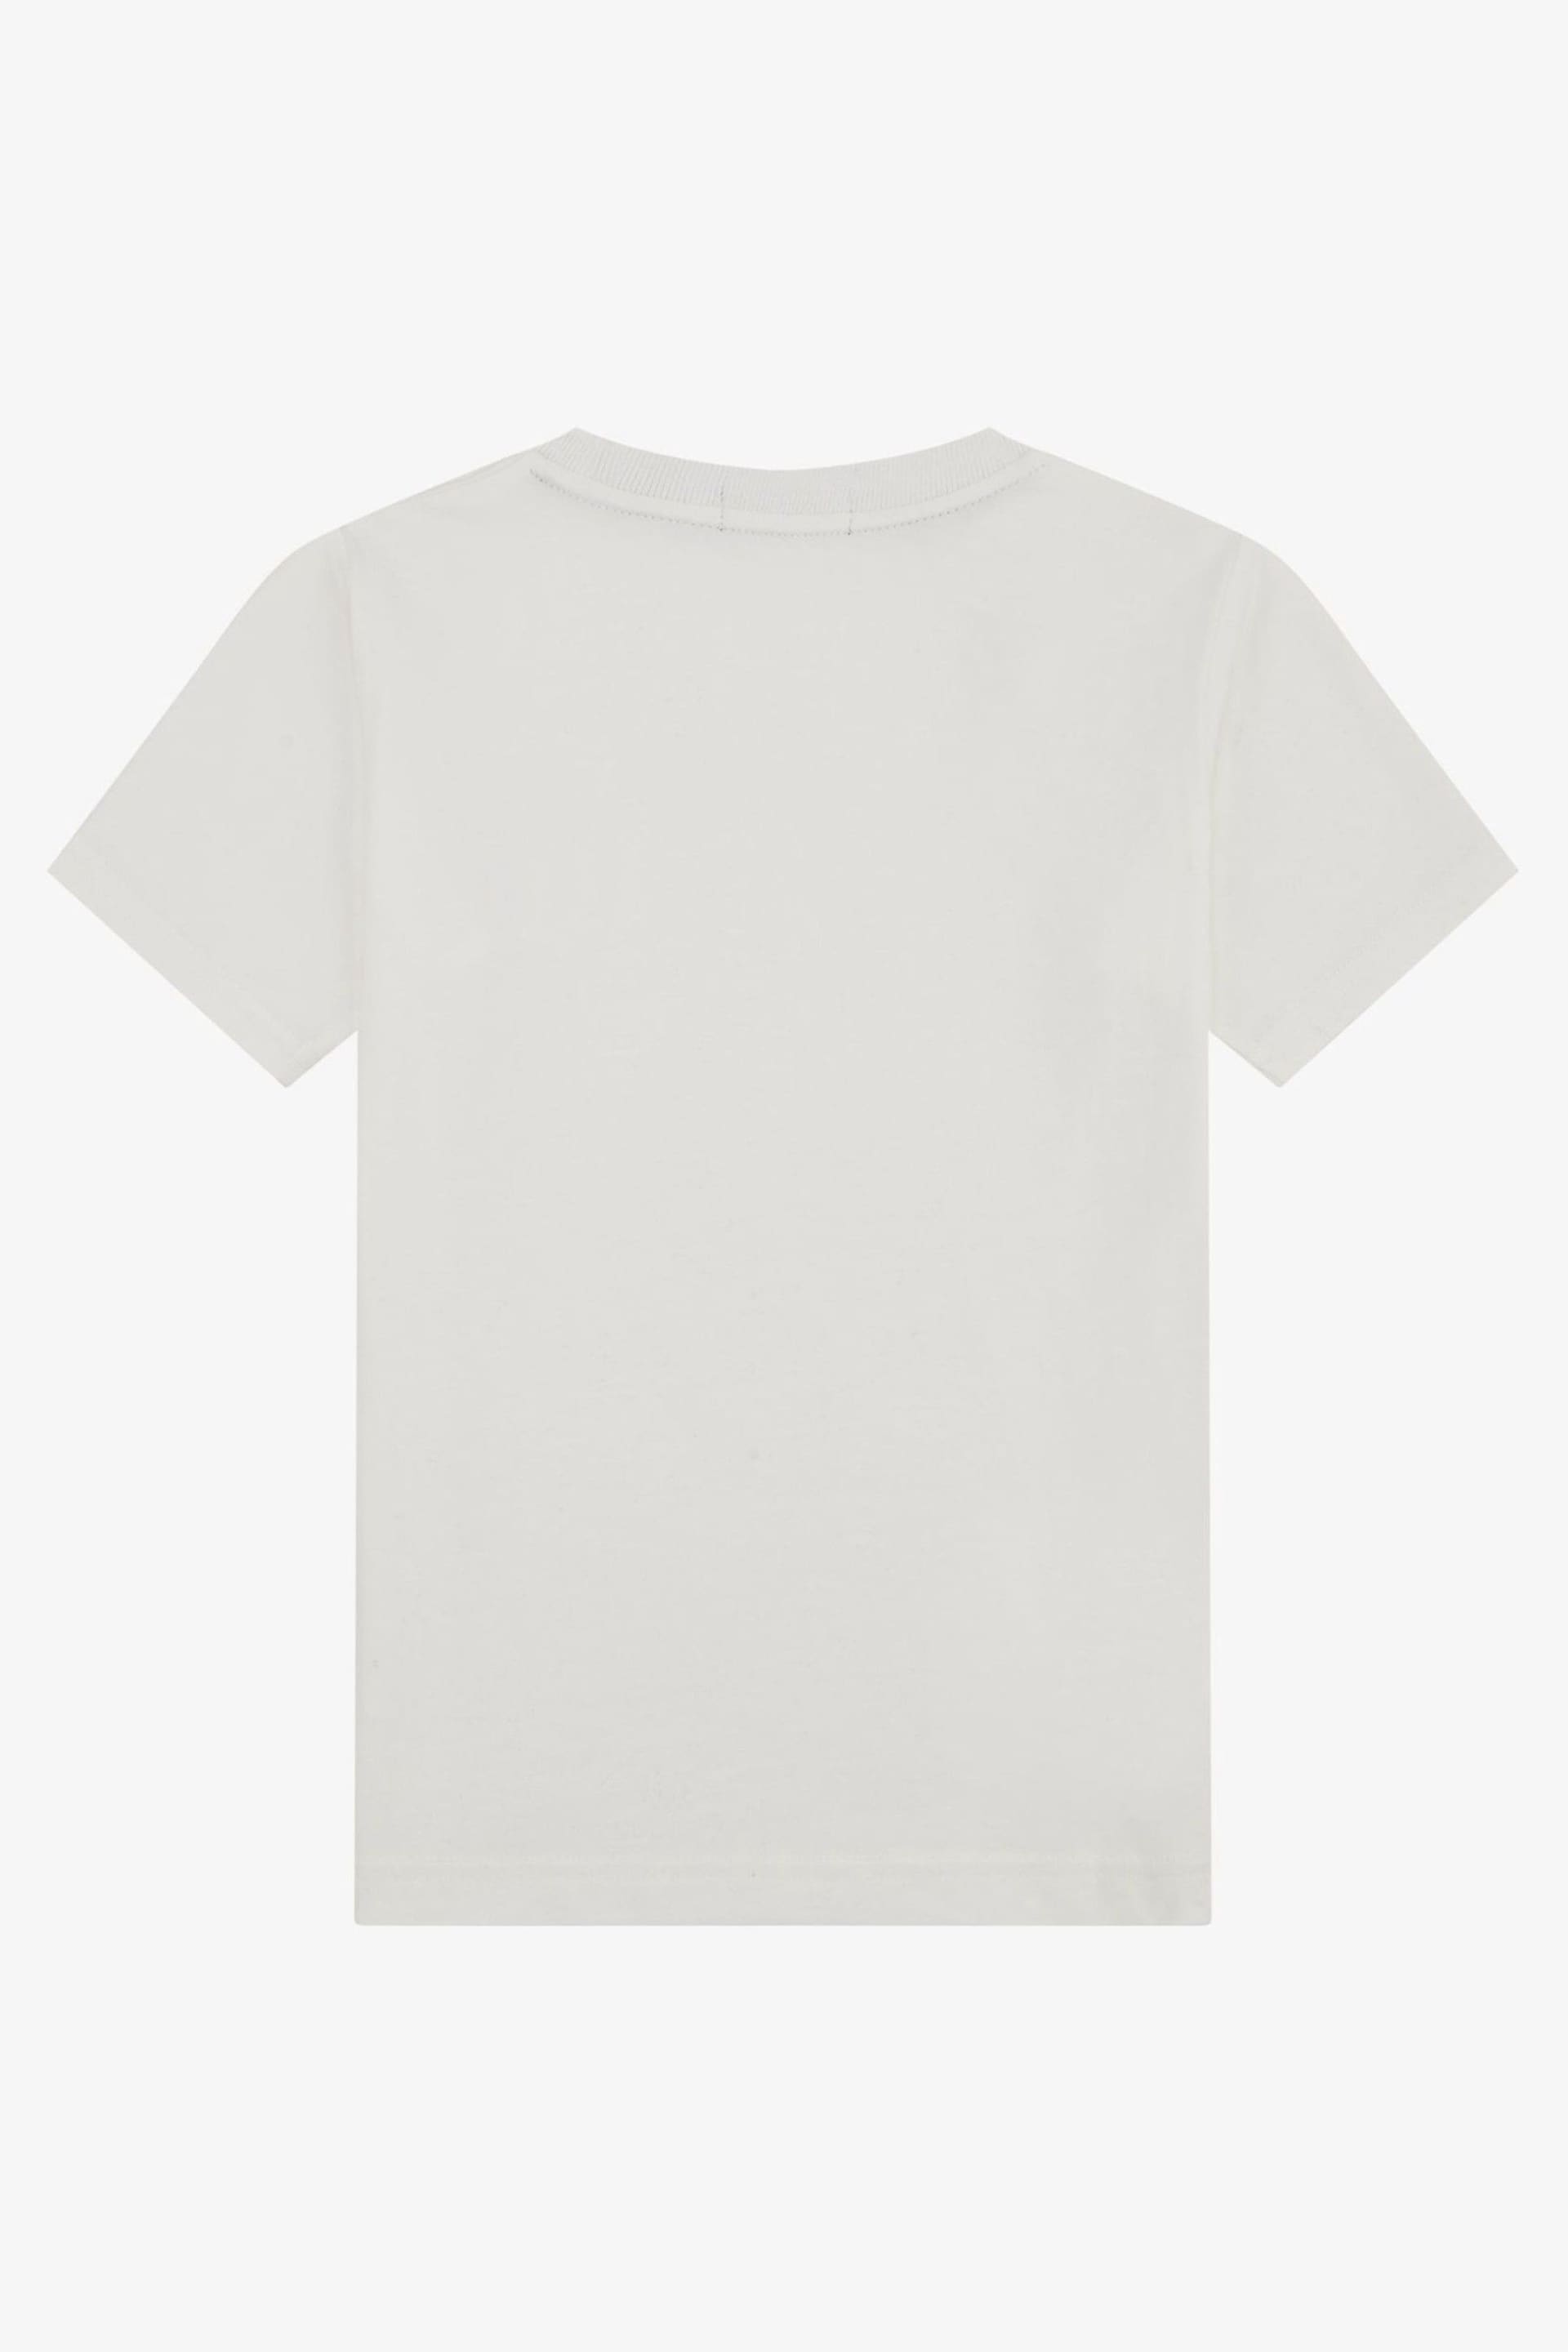 Fred Perry Kids Crew Neck T-Shirt - Image 2 of 4